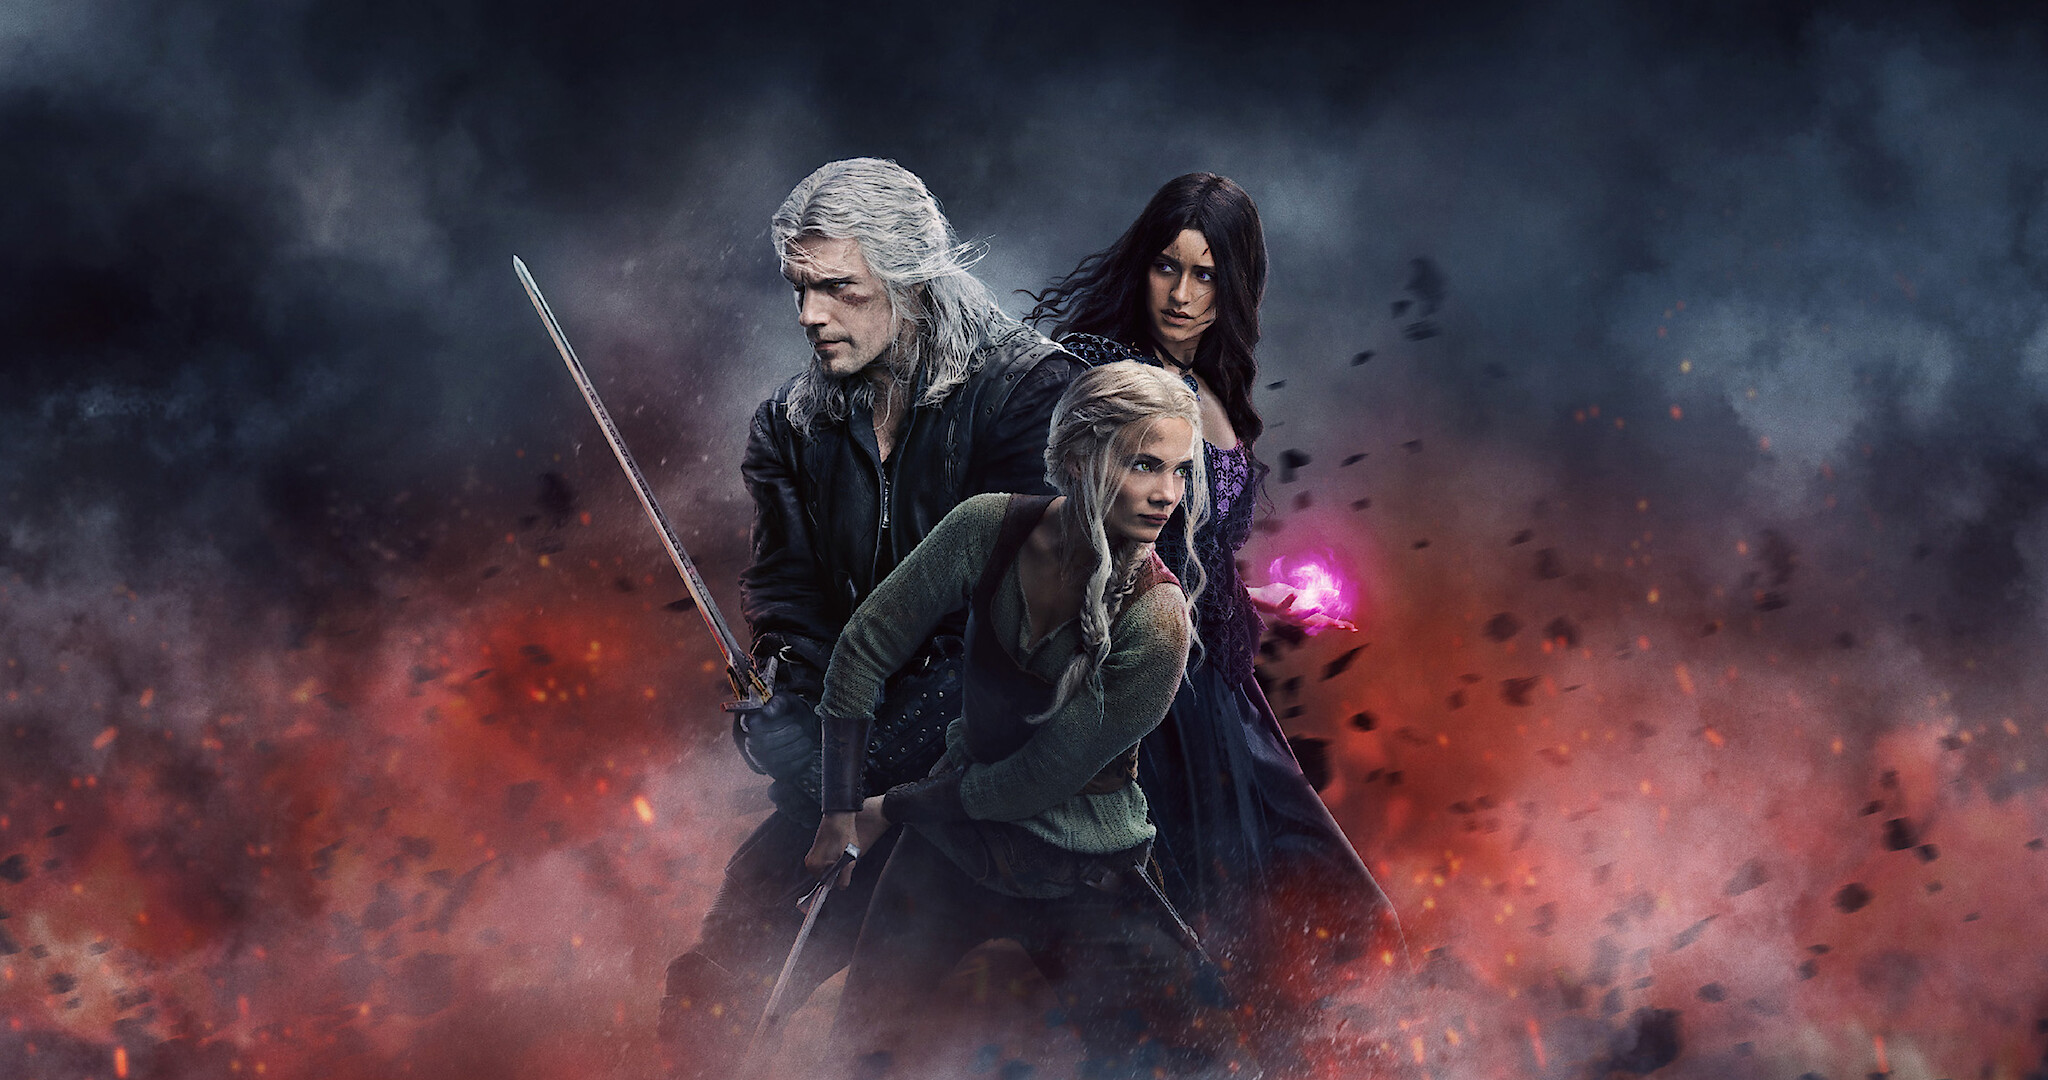 The Witcher Cast, News, Videos and more